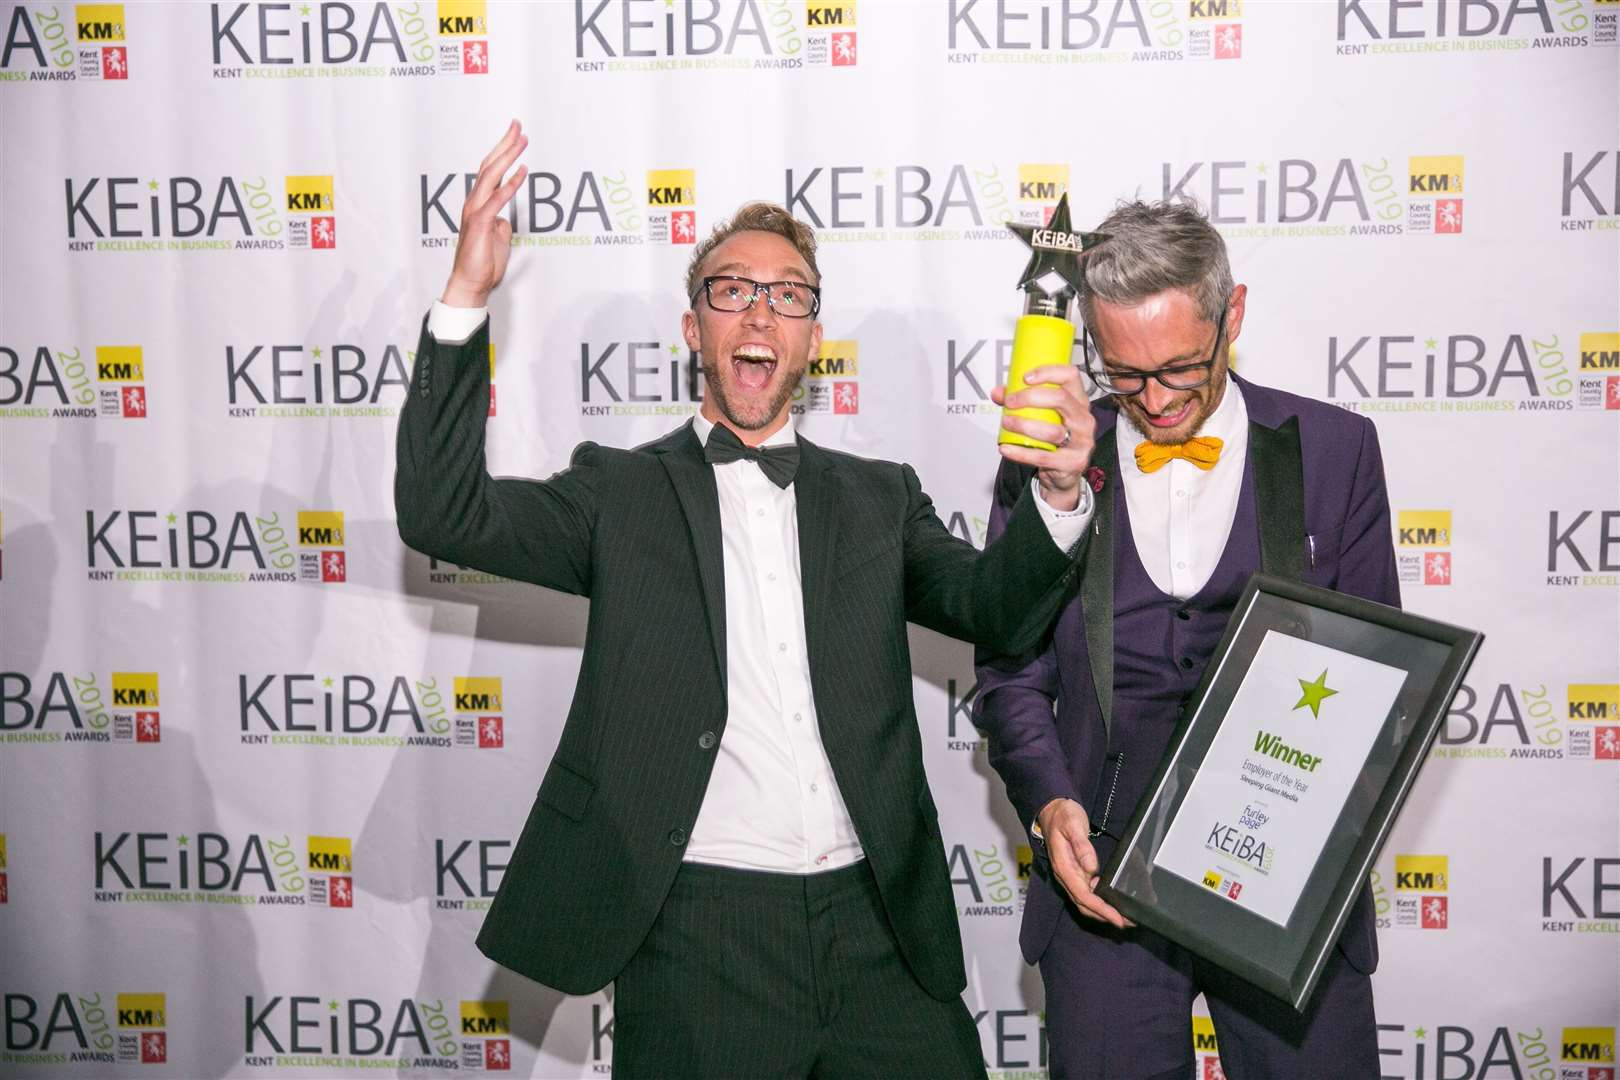 Winning a KEiBA can boost your bottom line and your reputation